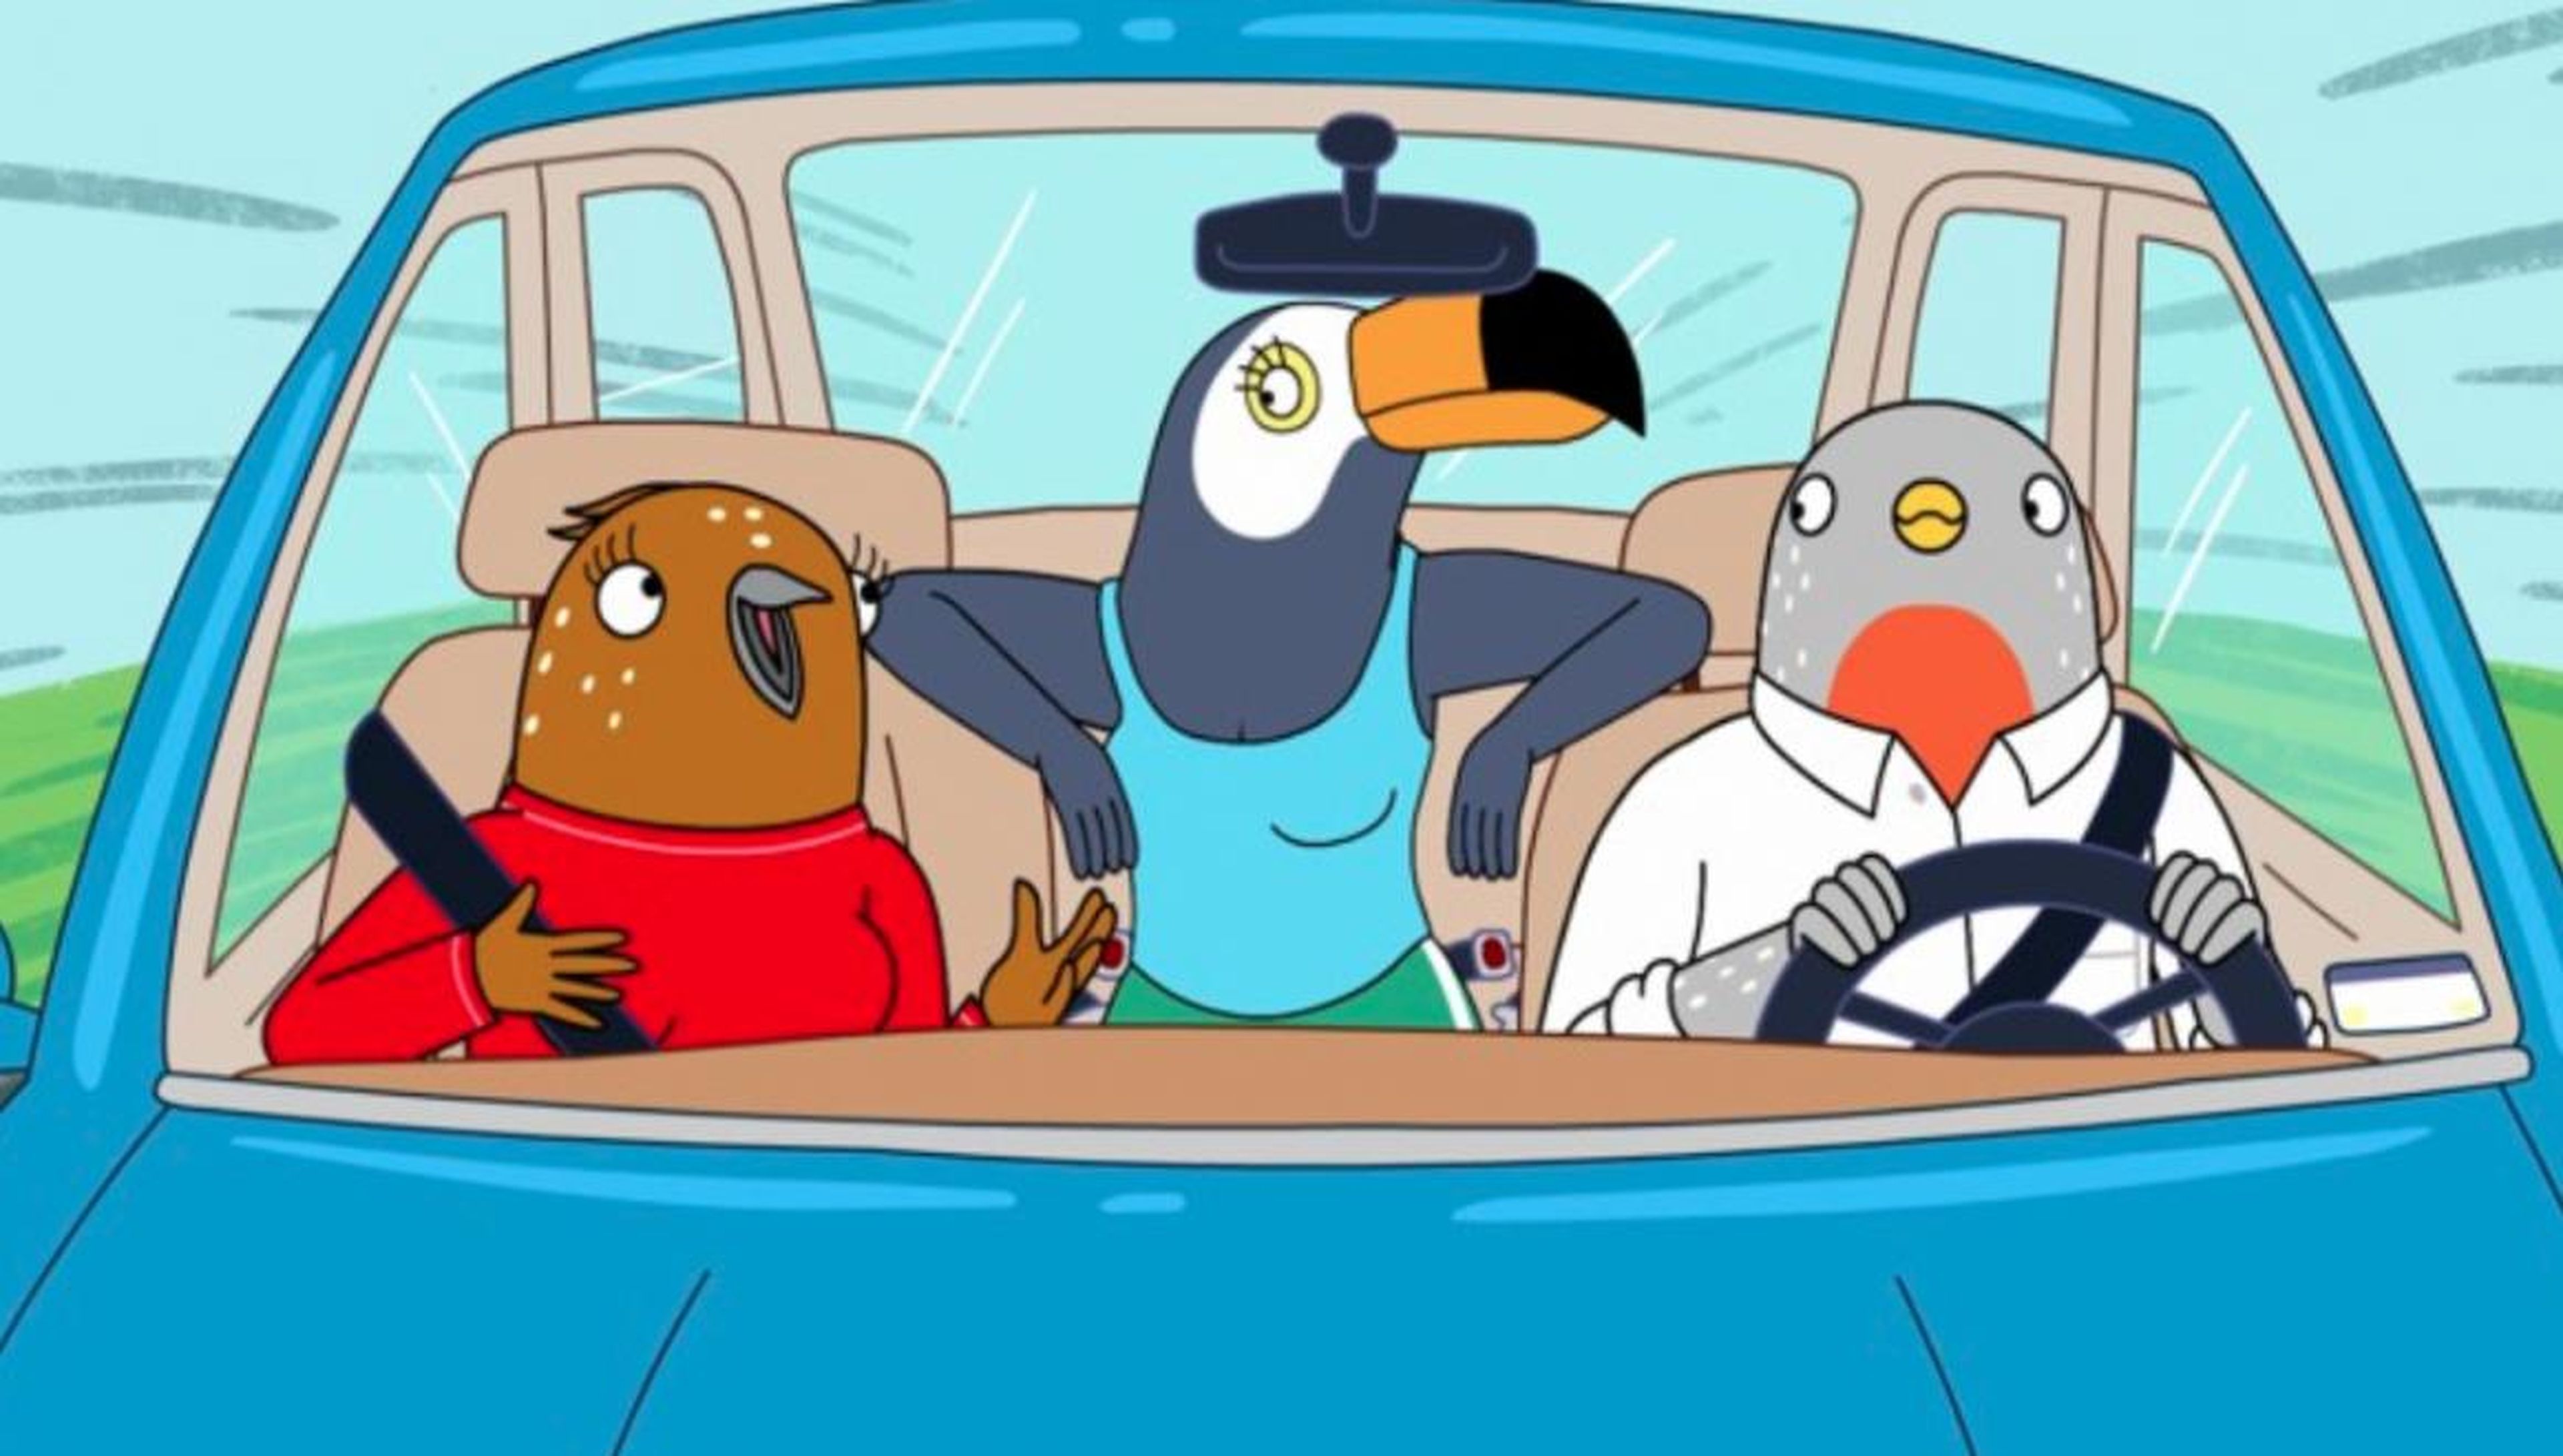 2. "Tuca and Bertie" — canceled after 1 season